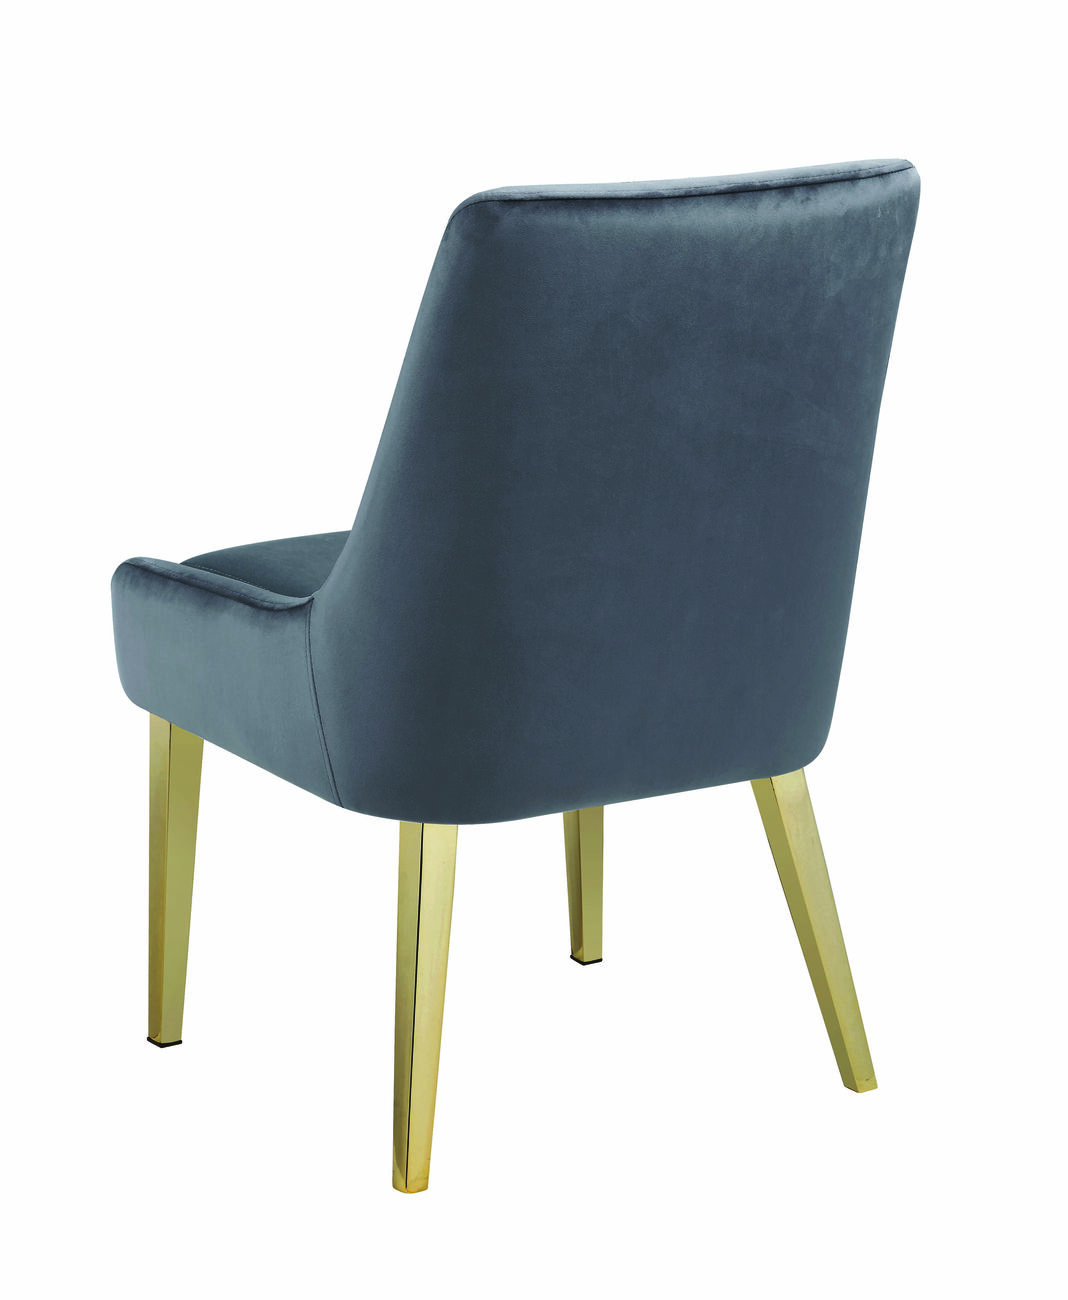 Metal Framed Dining Chair with Velvet Upholstered Seat and Back, Gray and Gold, Set of Two